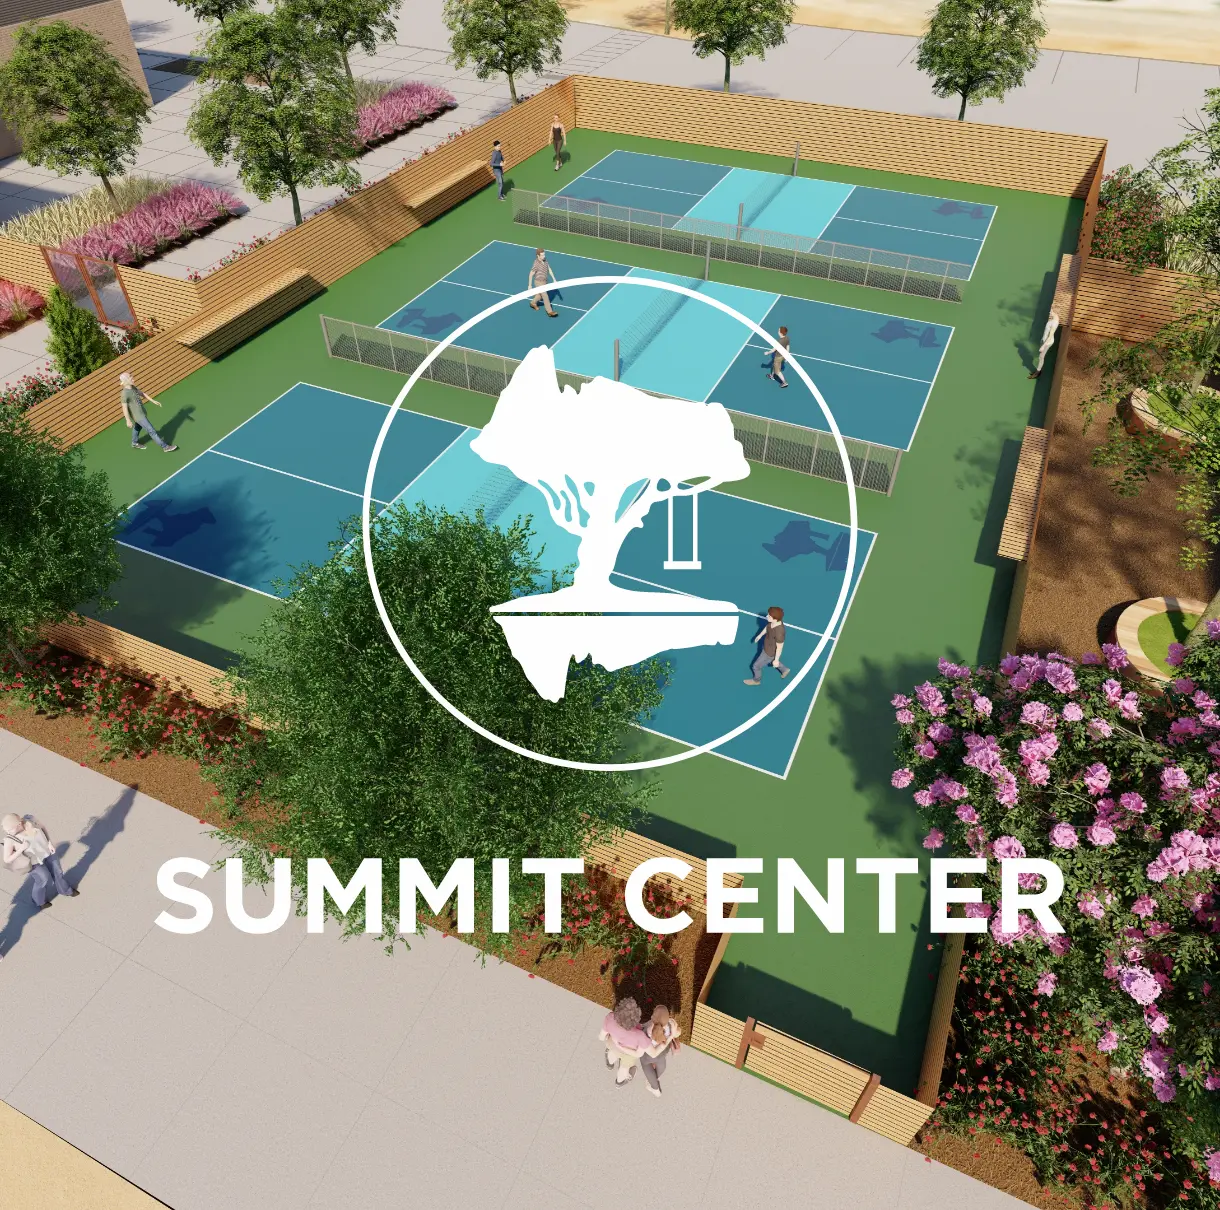 rendering and logo from summit center project